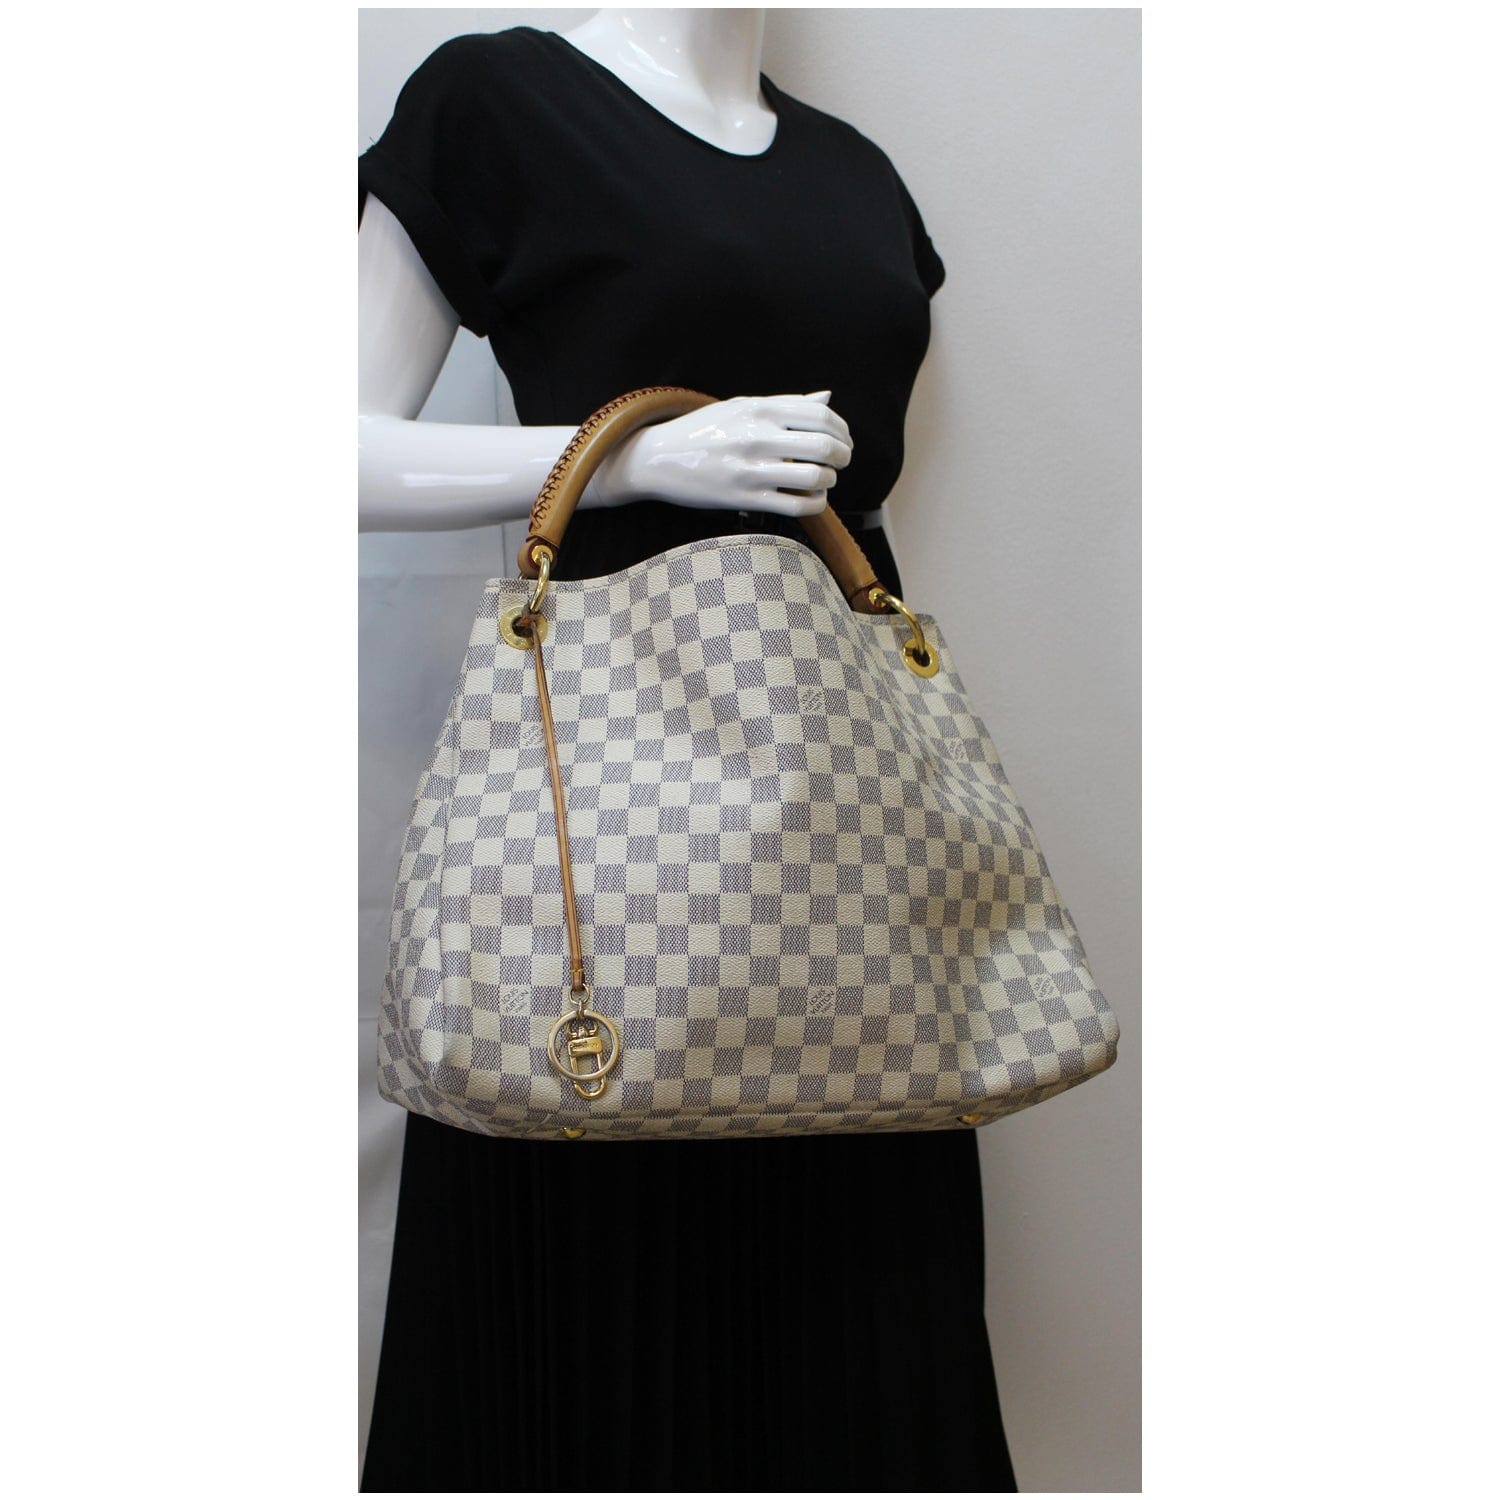 White and Grey Louis Vuitton Damier Azur Artsy MM Bag at 1stDibs